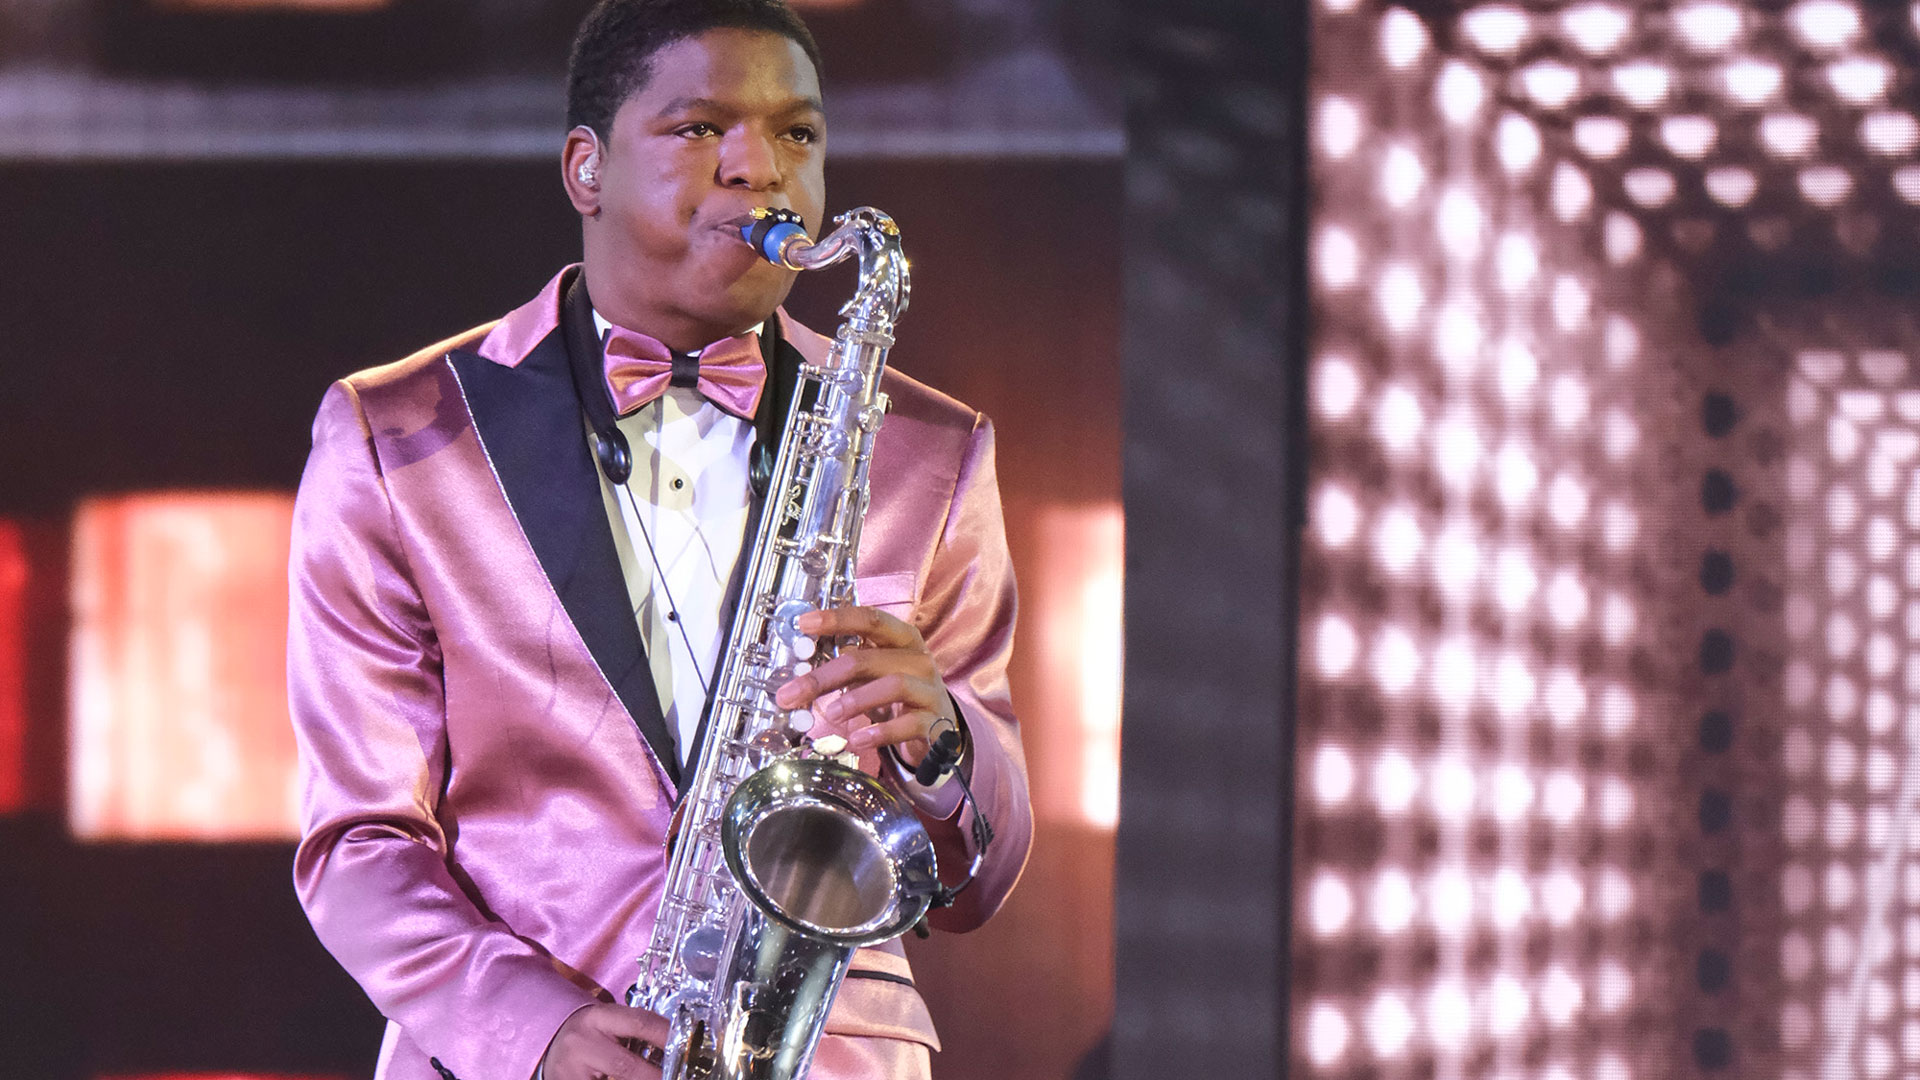 Avery Dixon Performs "Ain't Nobody" on The Saxophone | NBC's AGT Finals 2022